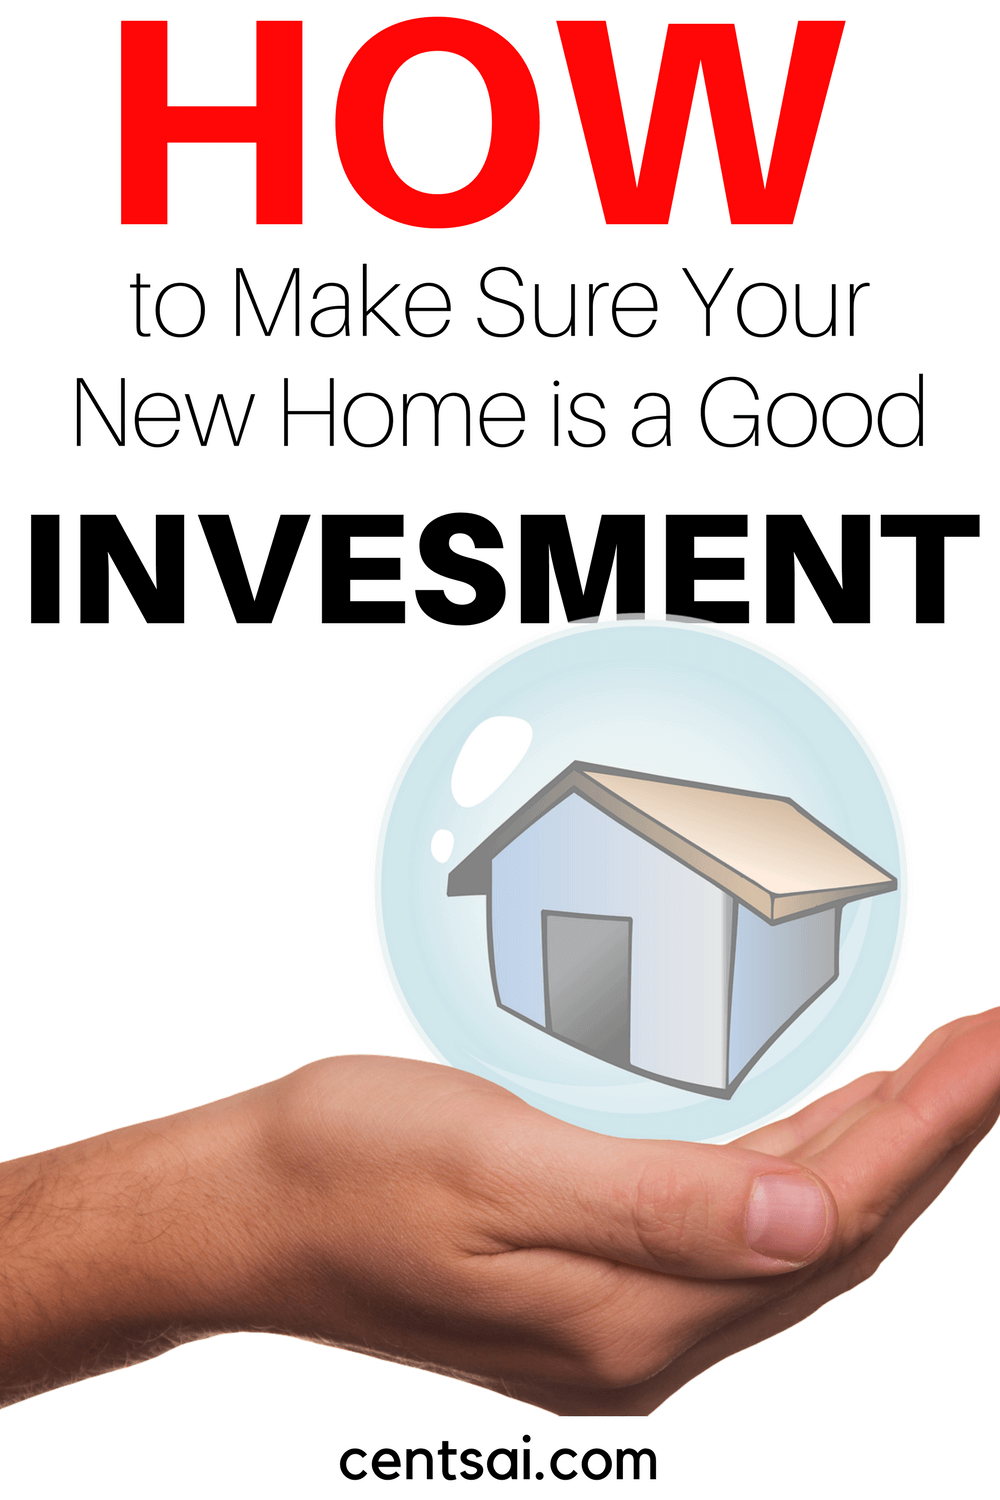 When looking to buy a new house, sometimes it's best to think of the new place as an investment first and a home second.